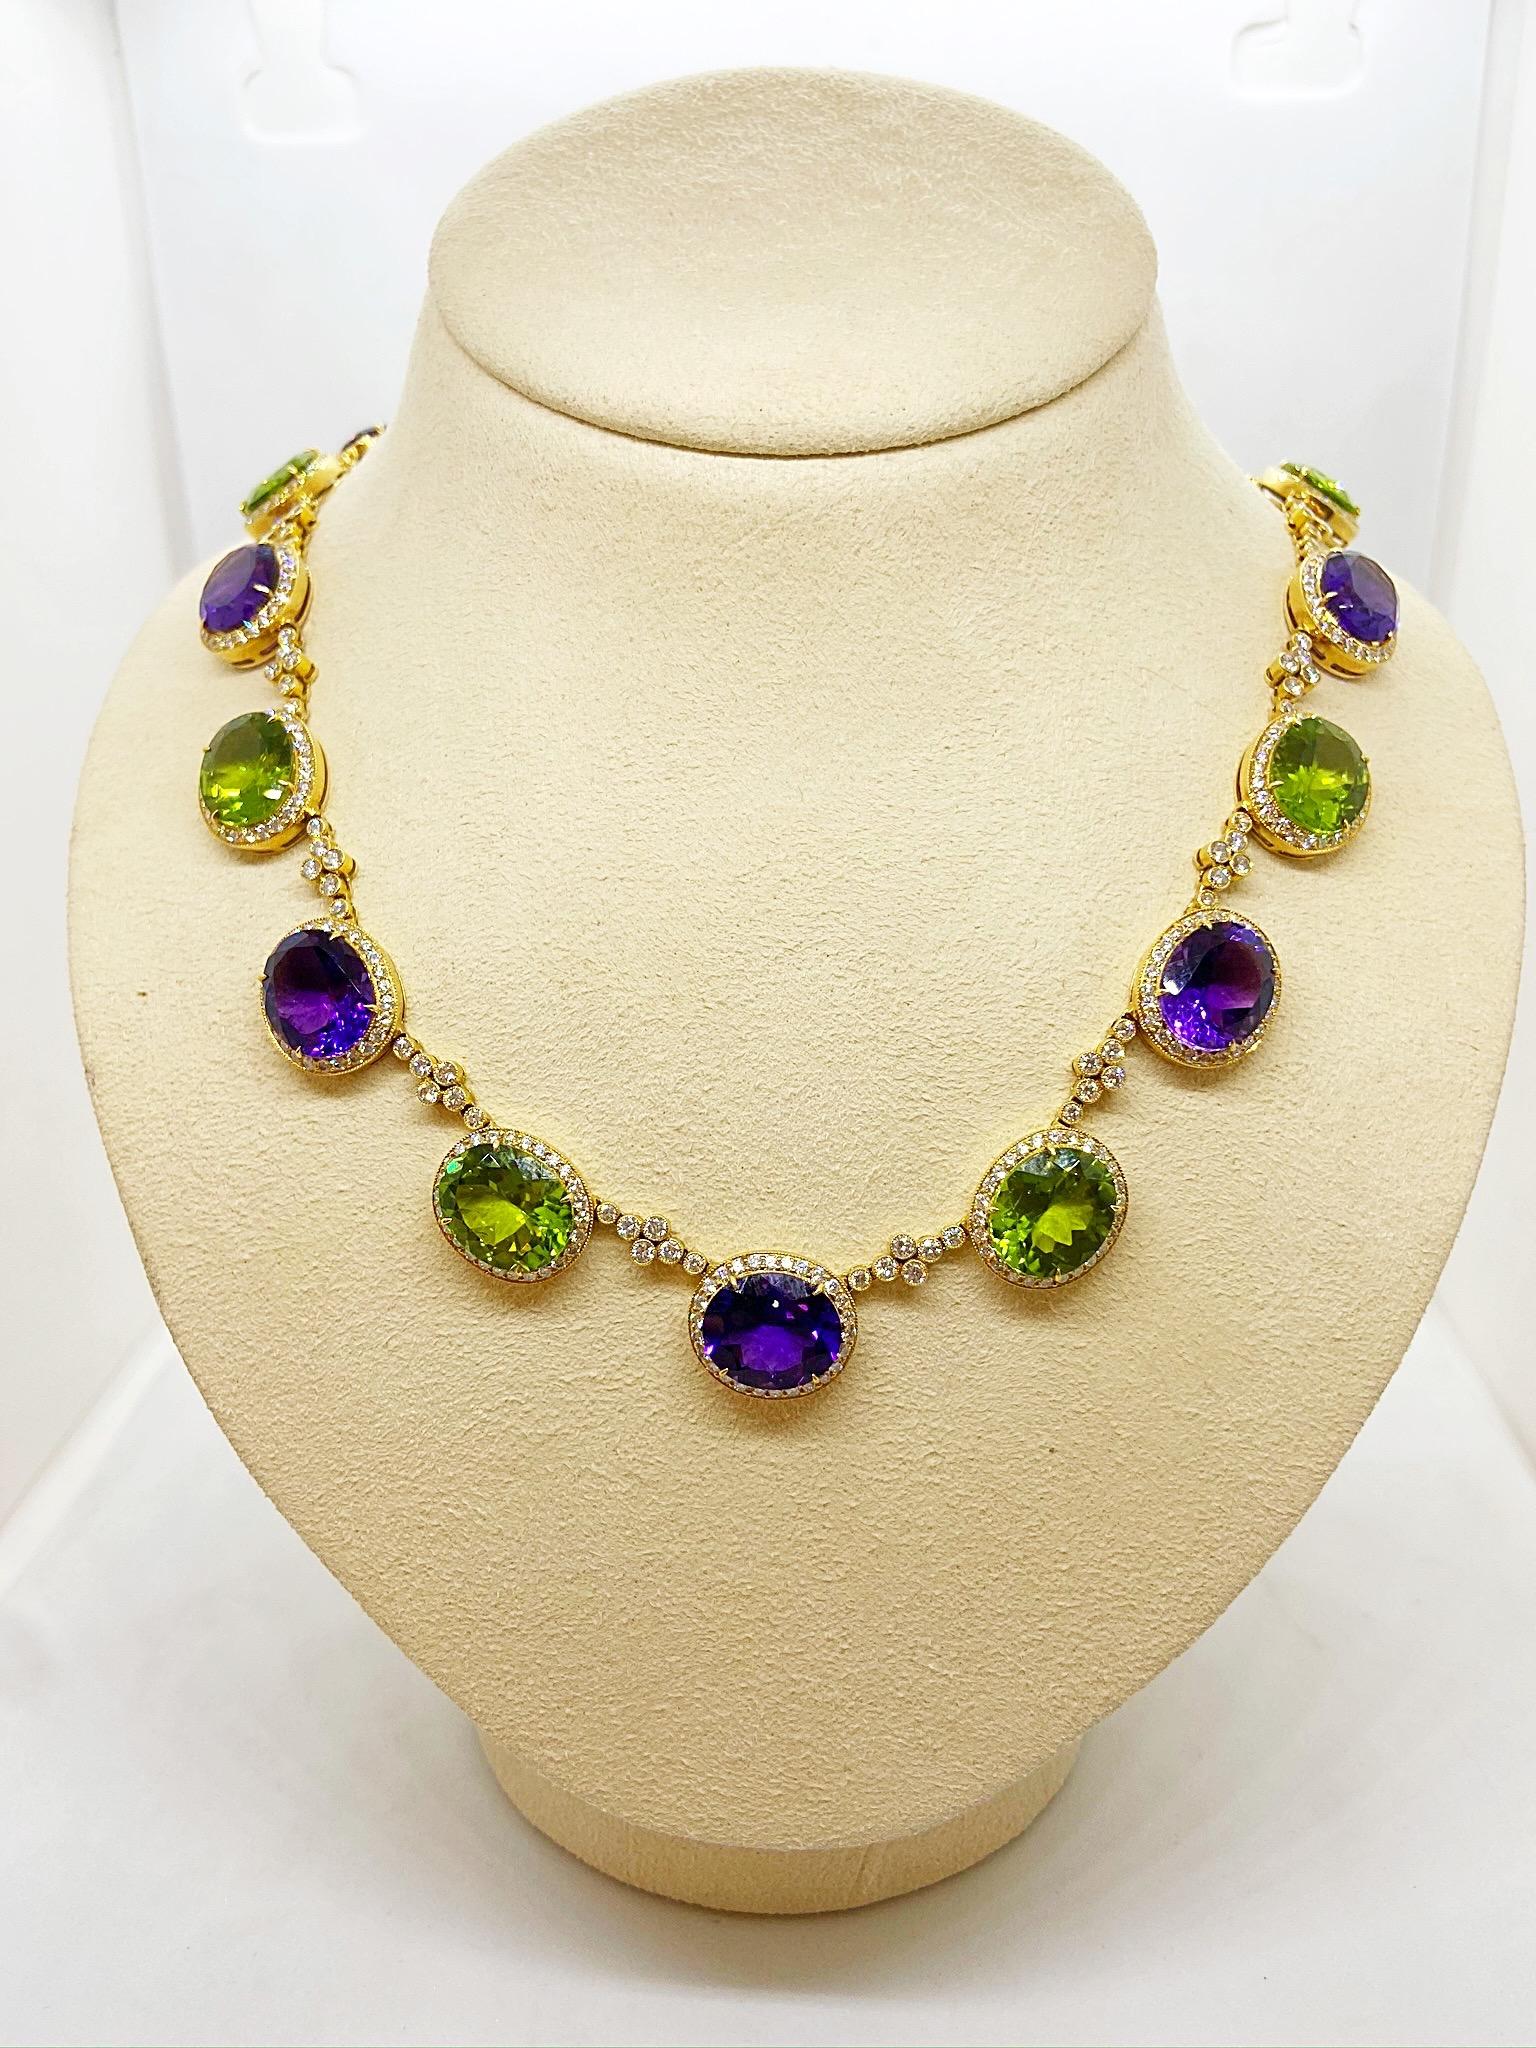 18KT YG Necklace with Diamond 8.25CT's, Amethyst 32.54Ct., Peridot 37.07Ct. For Sale 1